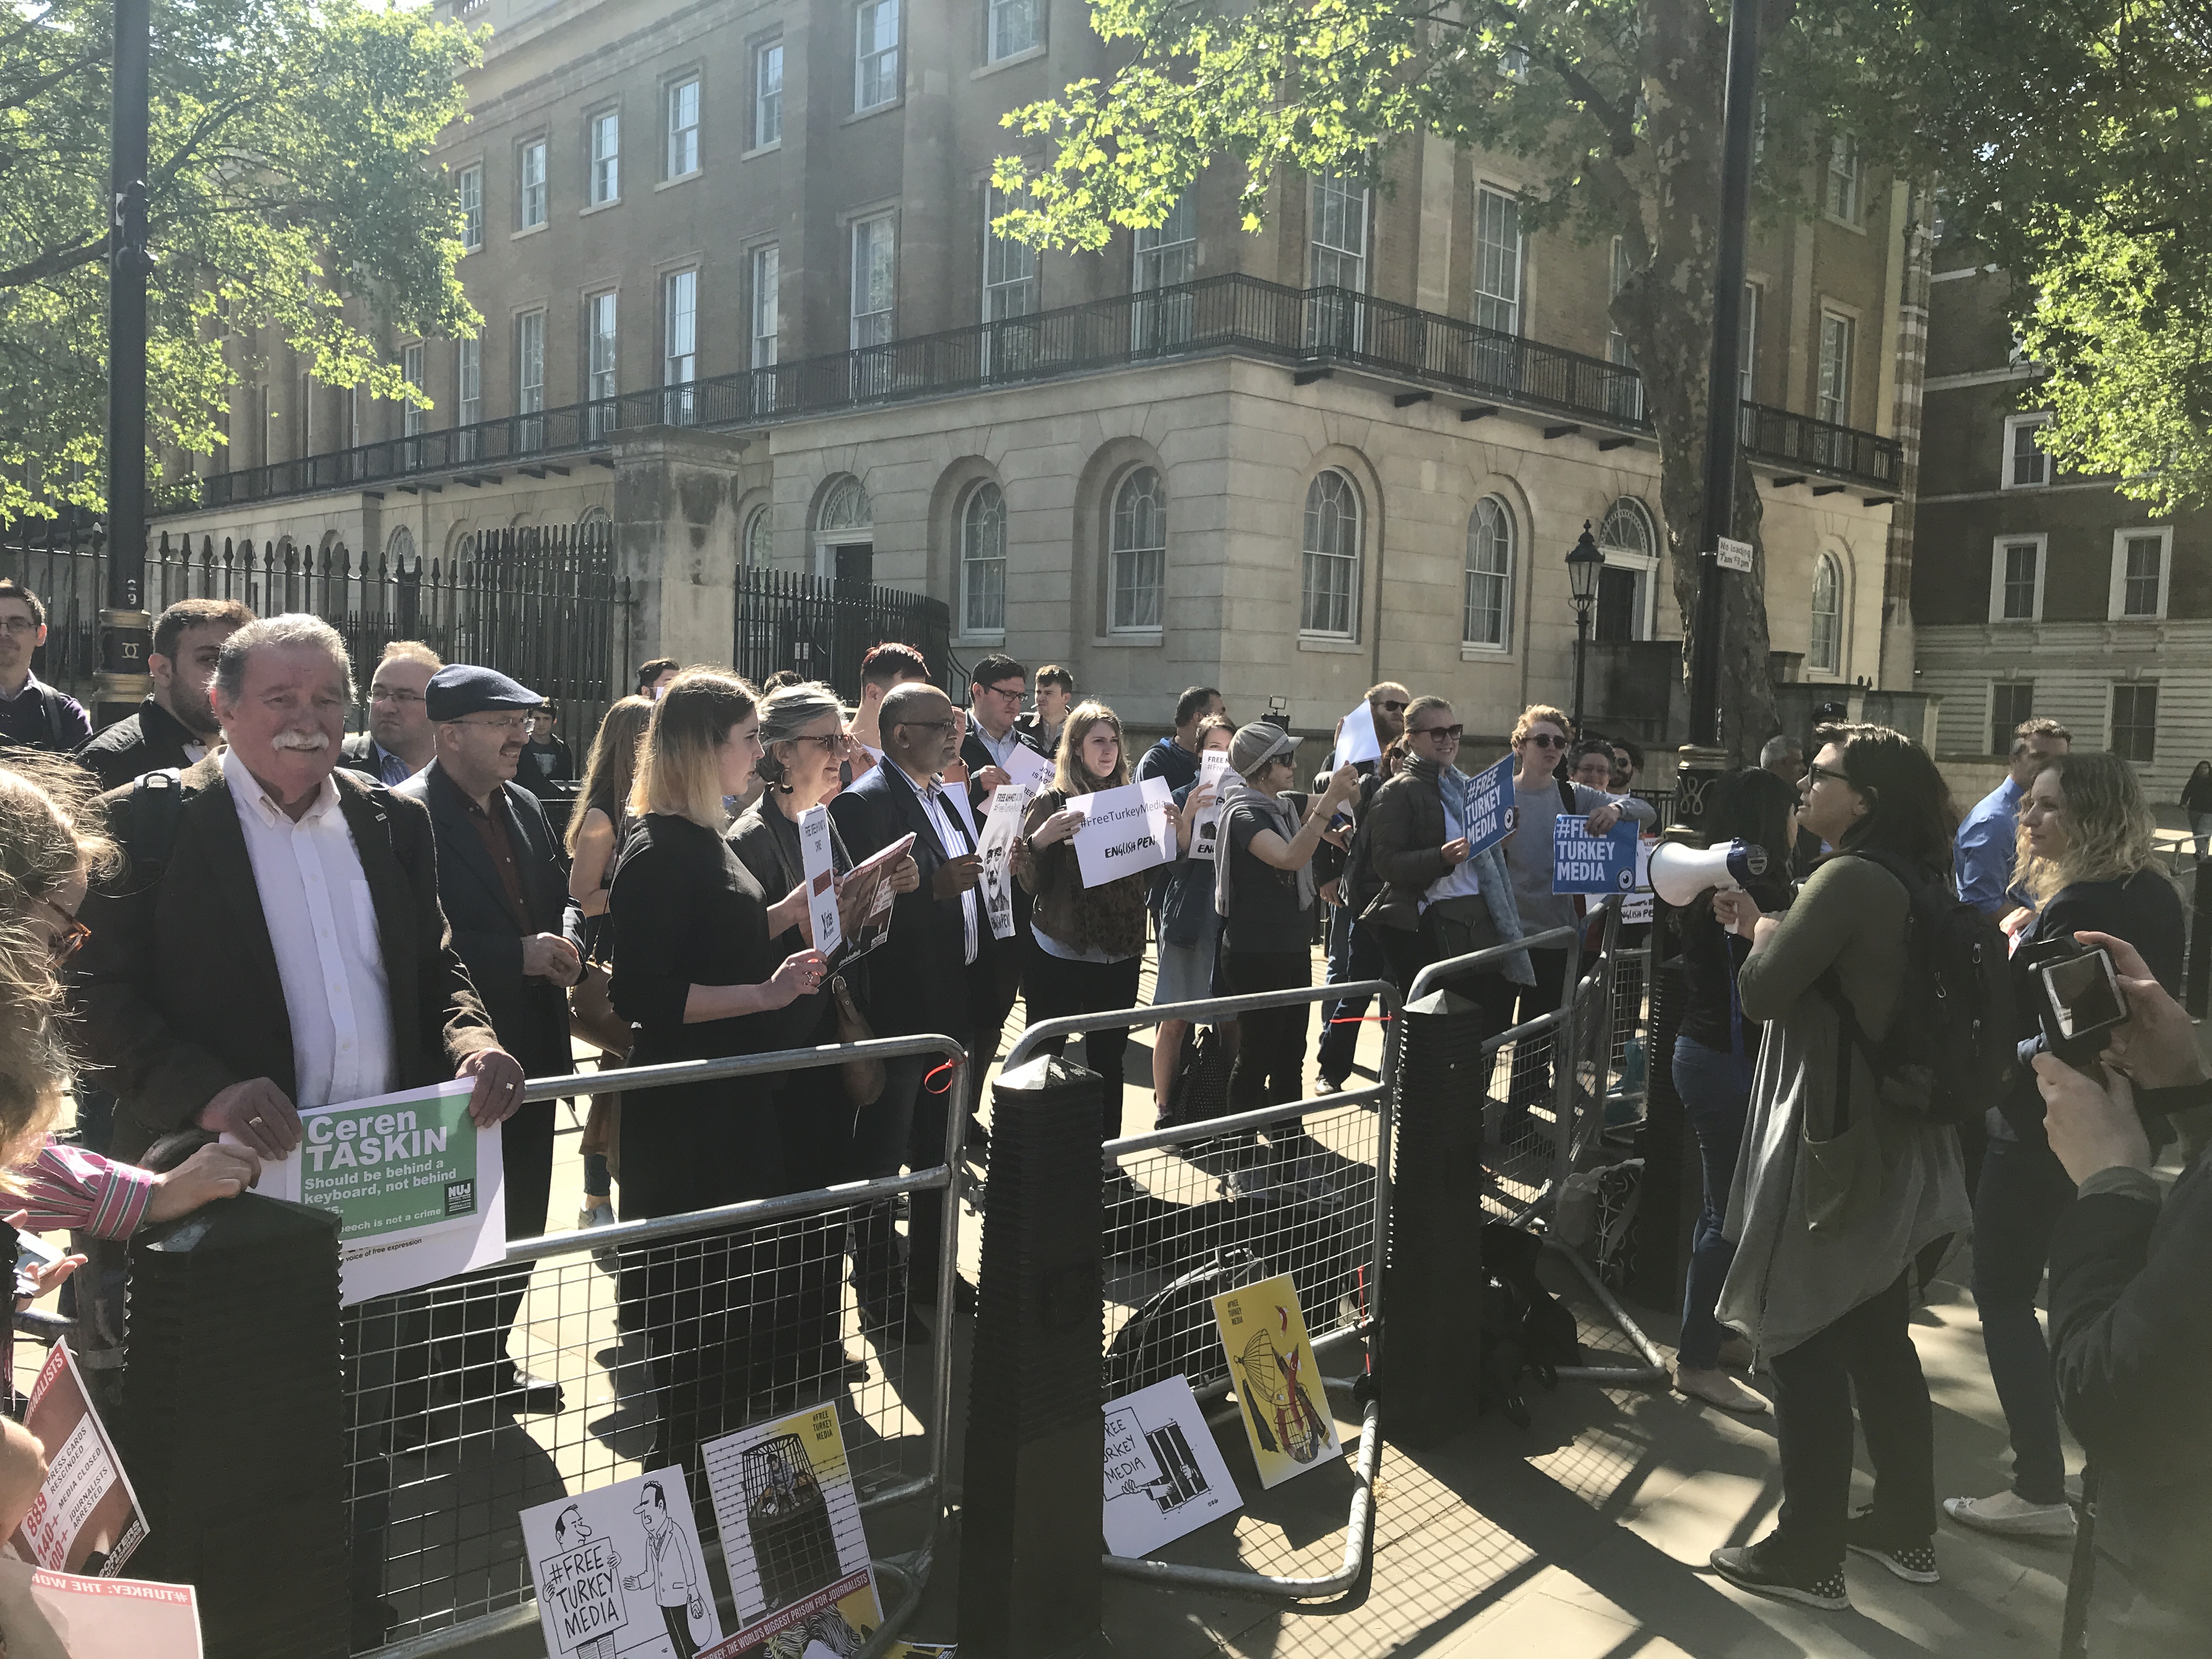 Index on Censorship magazine editor Rachael Jolley leads chants in support of Turkey's jailed journalists ahead of Erdogan visit to Downing Street